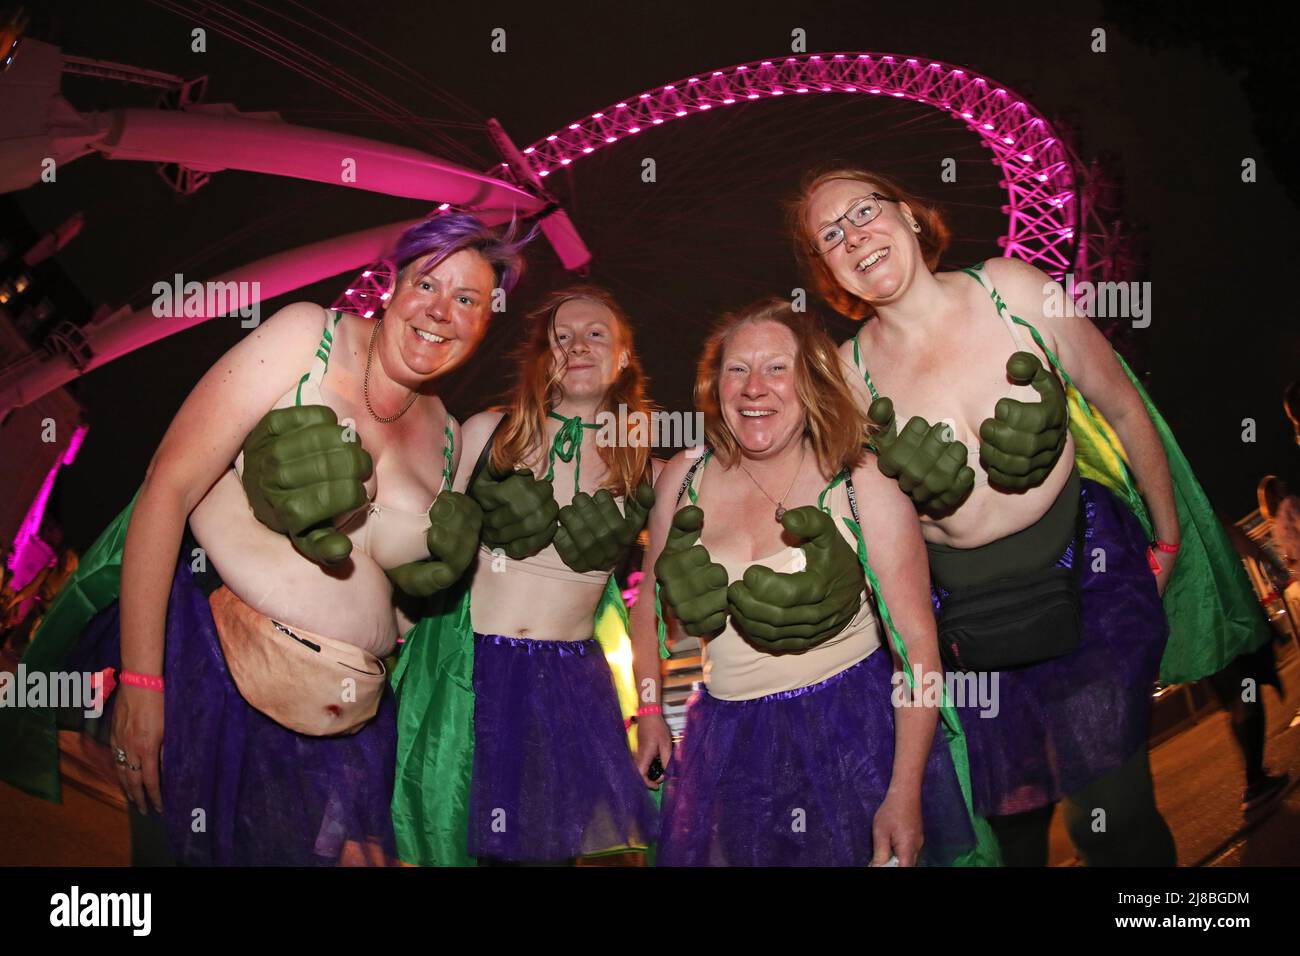 London, UK. 14th May 2022. London, UK. Participants dressed as their hero the Incredible Hulk passing the London Eye at the Walk the Walk Moonwalk walking through London wearing decorated bras fundraising for breast cancer charities doing a marathon overnight. This year the theme is 'Your Heroes' and there were numerous rainbow themed costumes and bras in support of NHS heroes, also many superhero costumes and even blue and yellow Ukranian flag themed costumes in support of Ukrainian heroes. Credit: Paul Brown/Alamy Live News Stock Photo